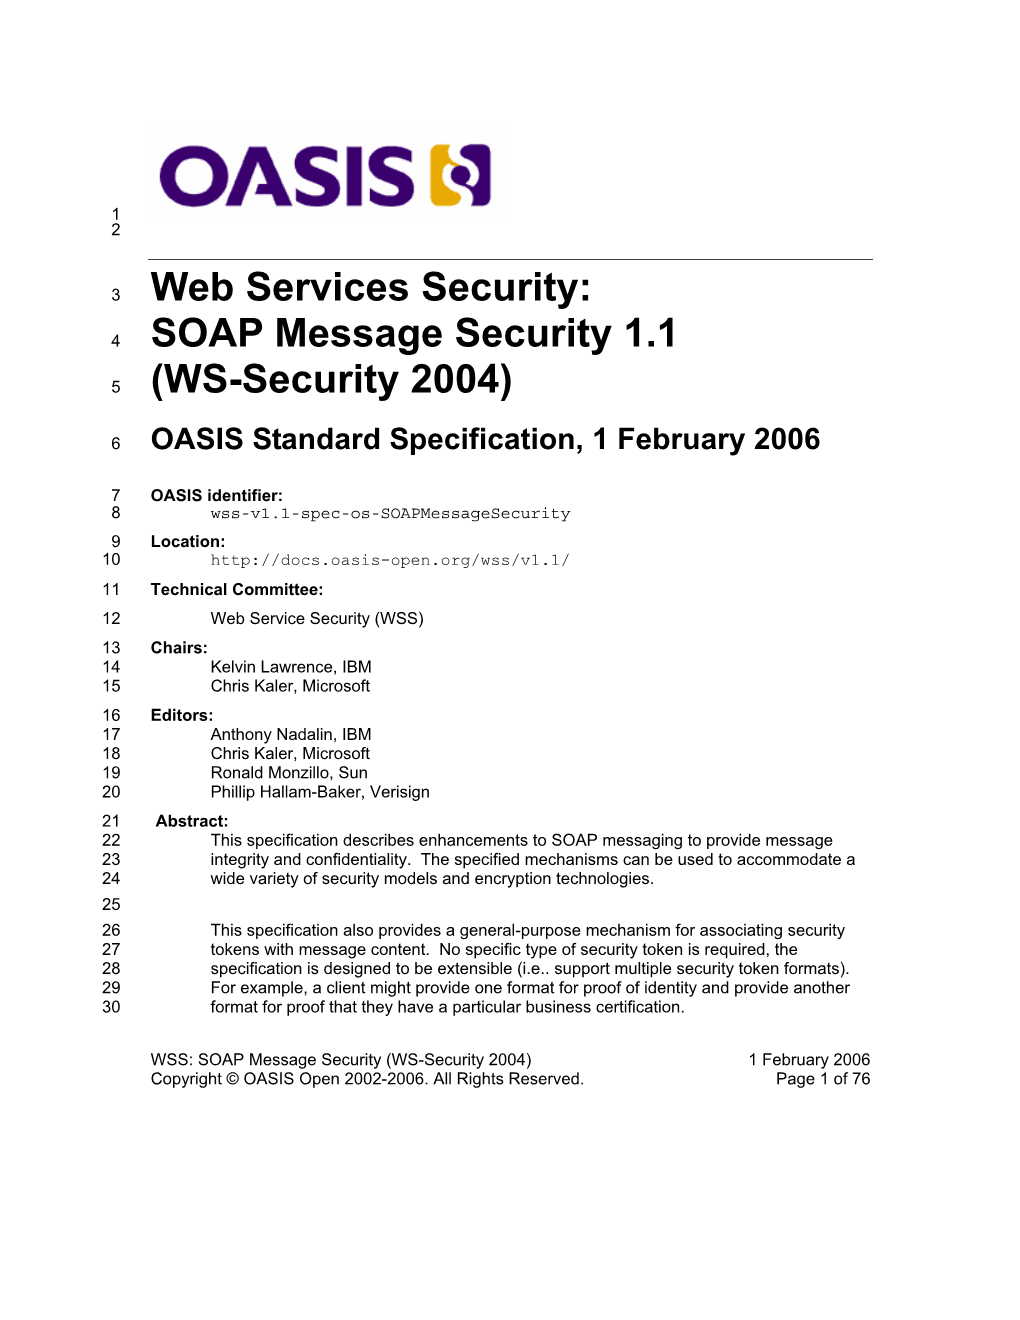 SOAP Message Security 1.1 (WS-Security 2004)